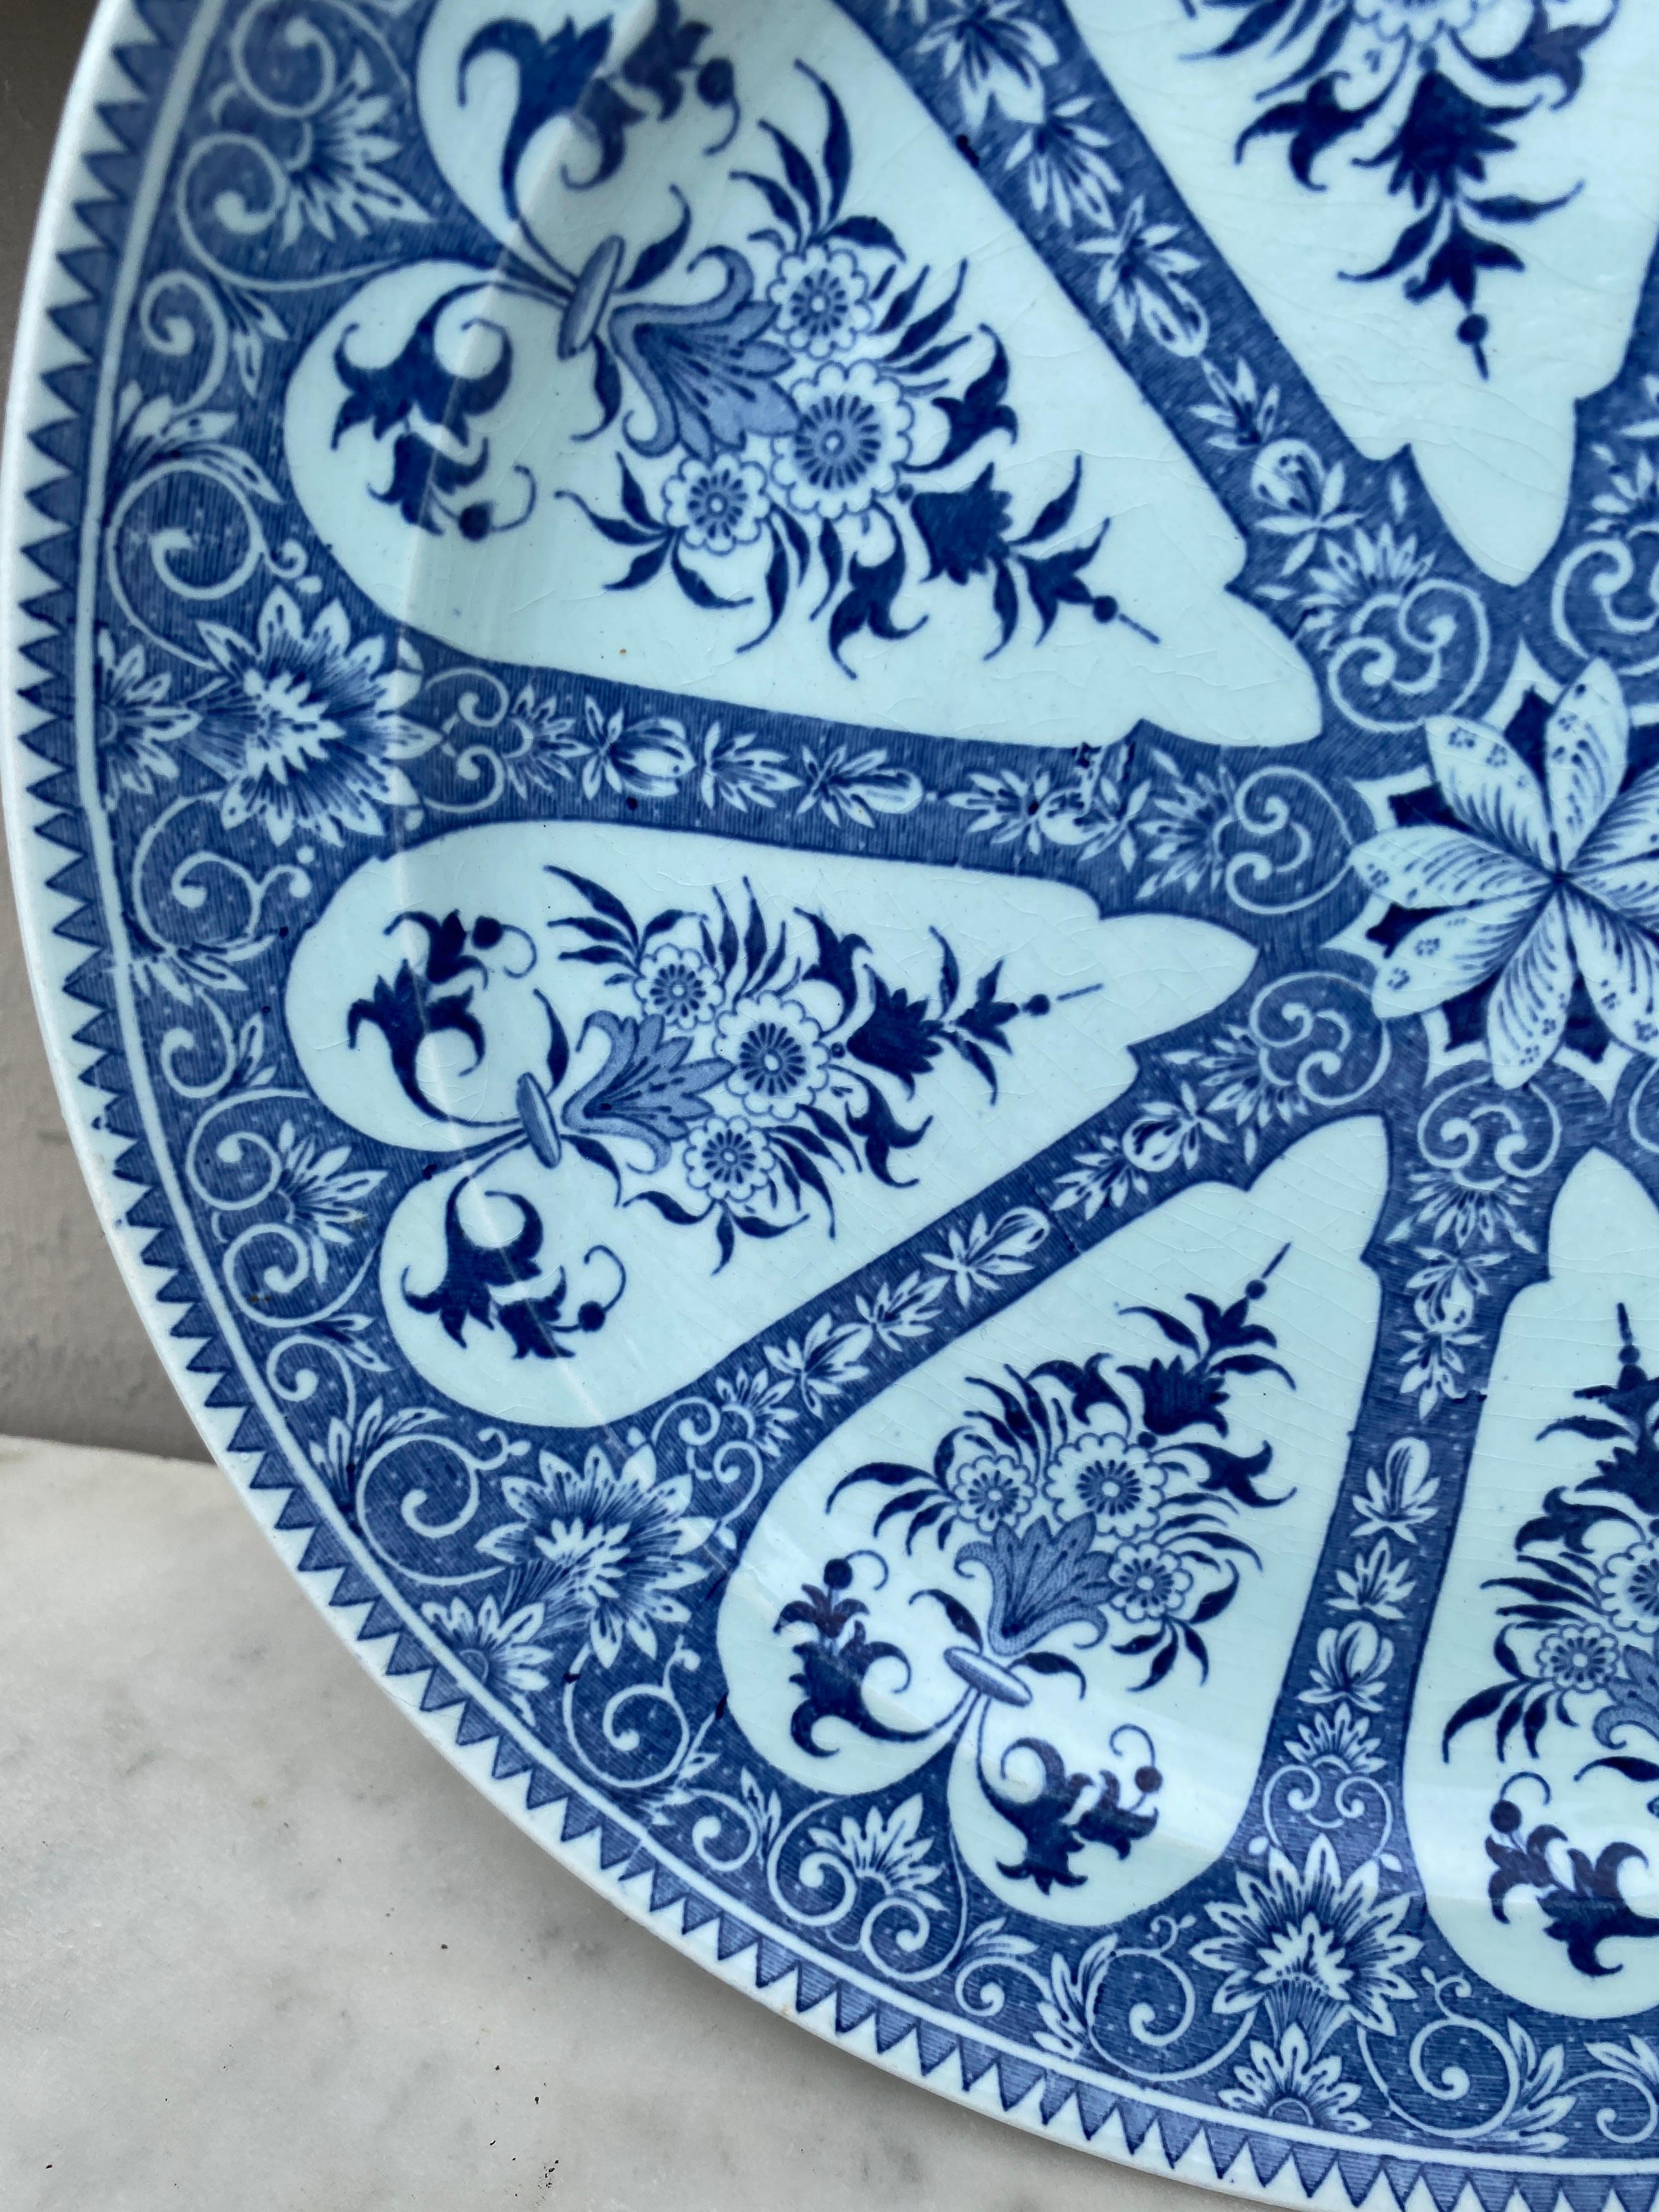 19th century French blue and white faience dinner plate signed 